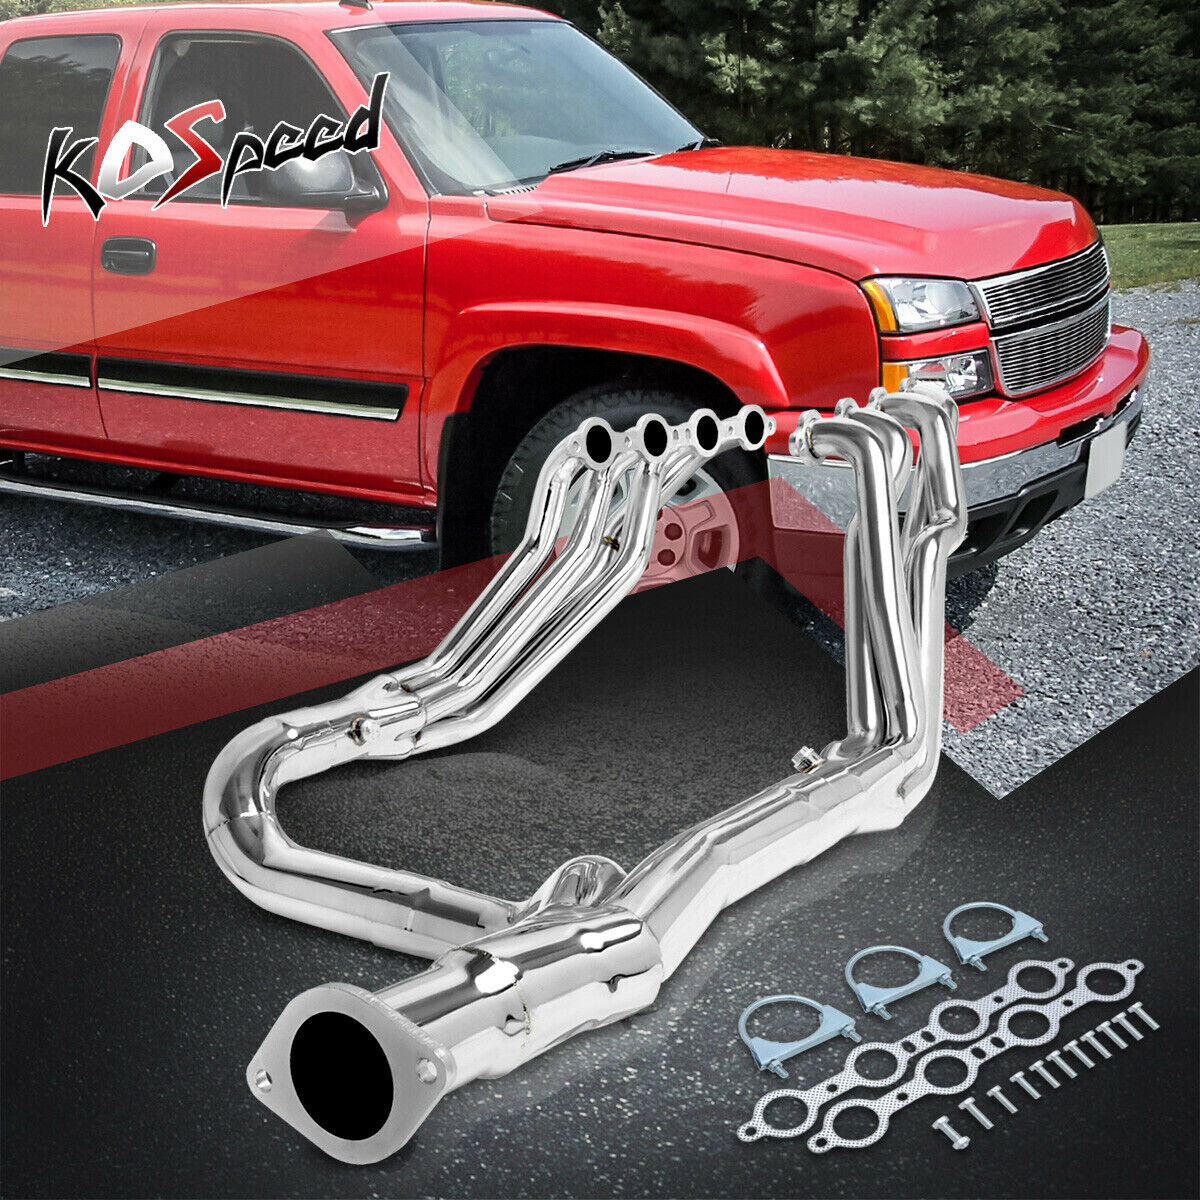 Stainless Steel Exhaust Header Manifold for 99-06 Tahoe/Yukon 4.8L/5.3L/6.0L V8